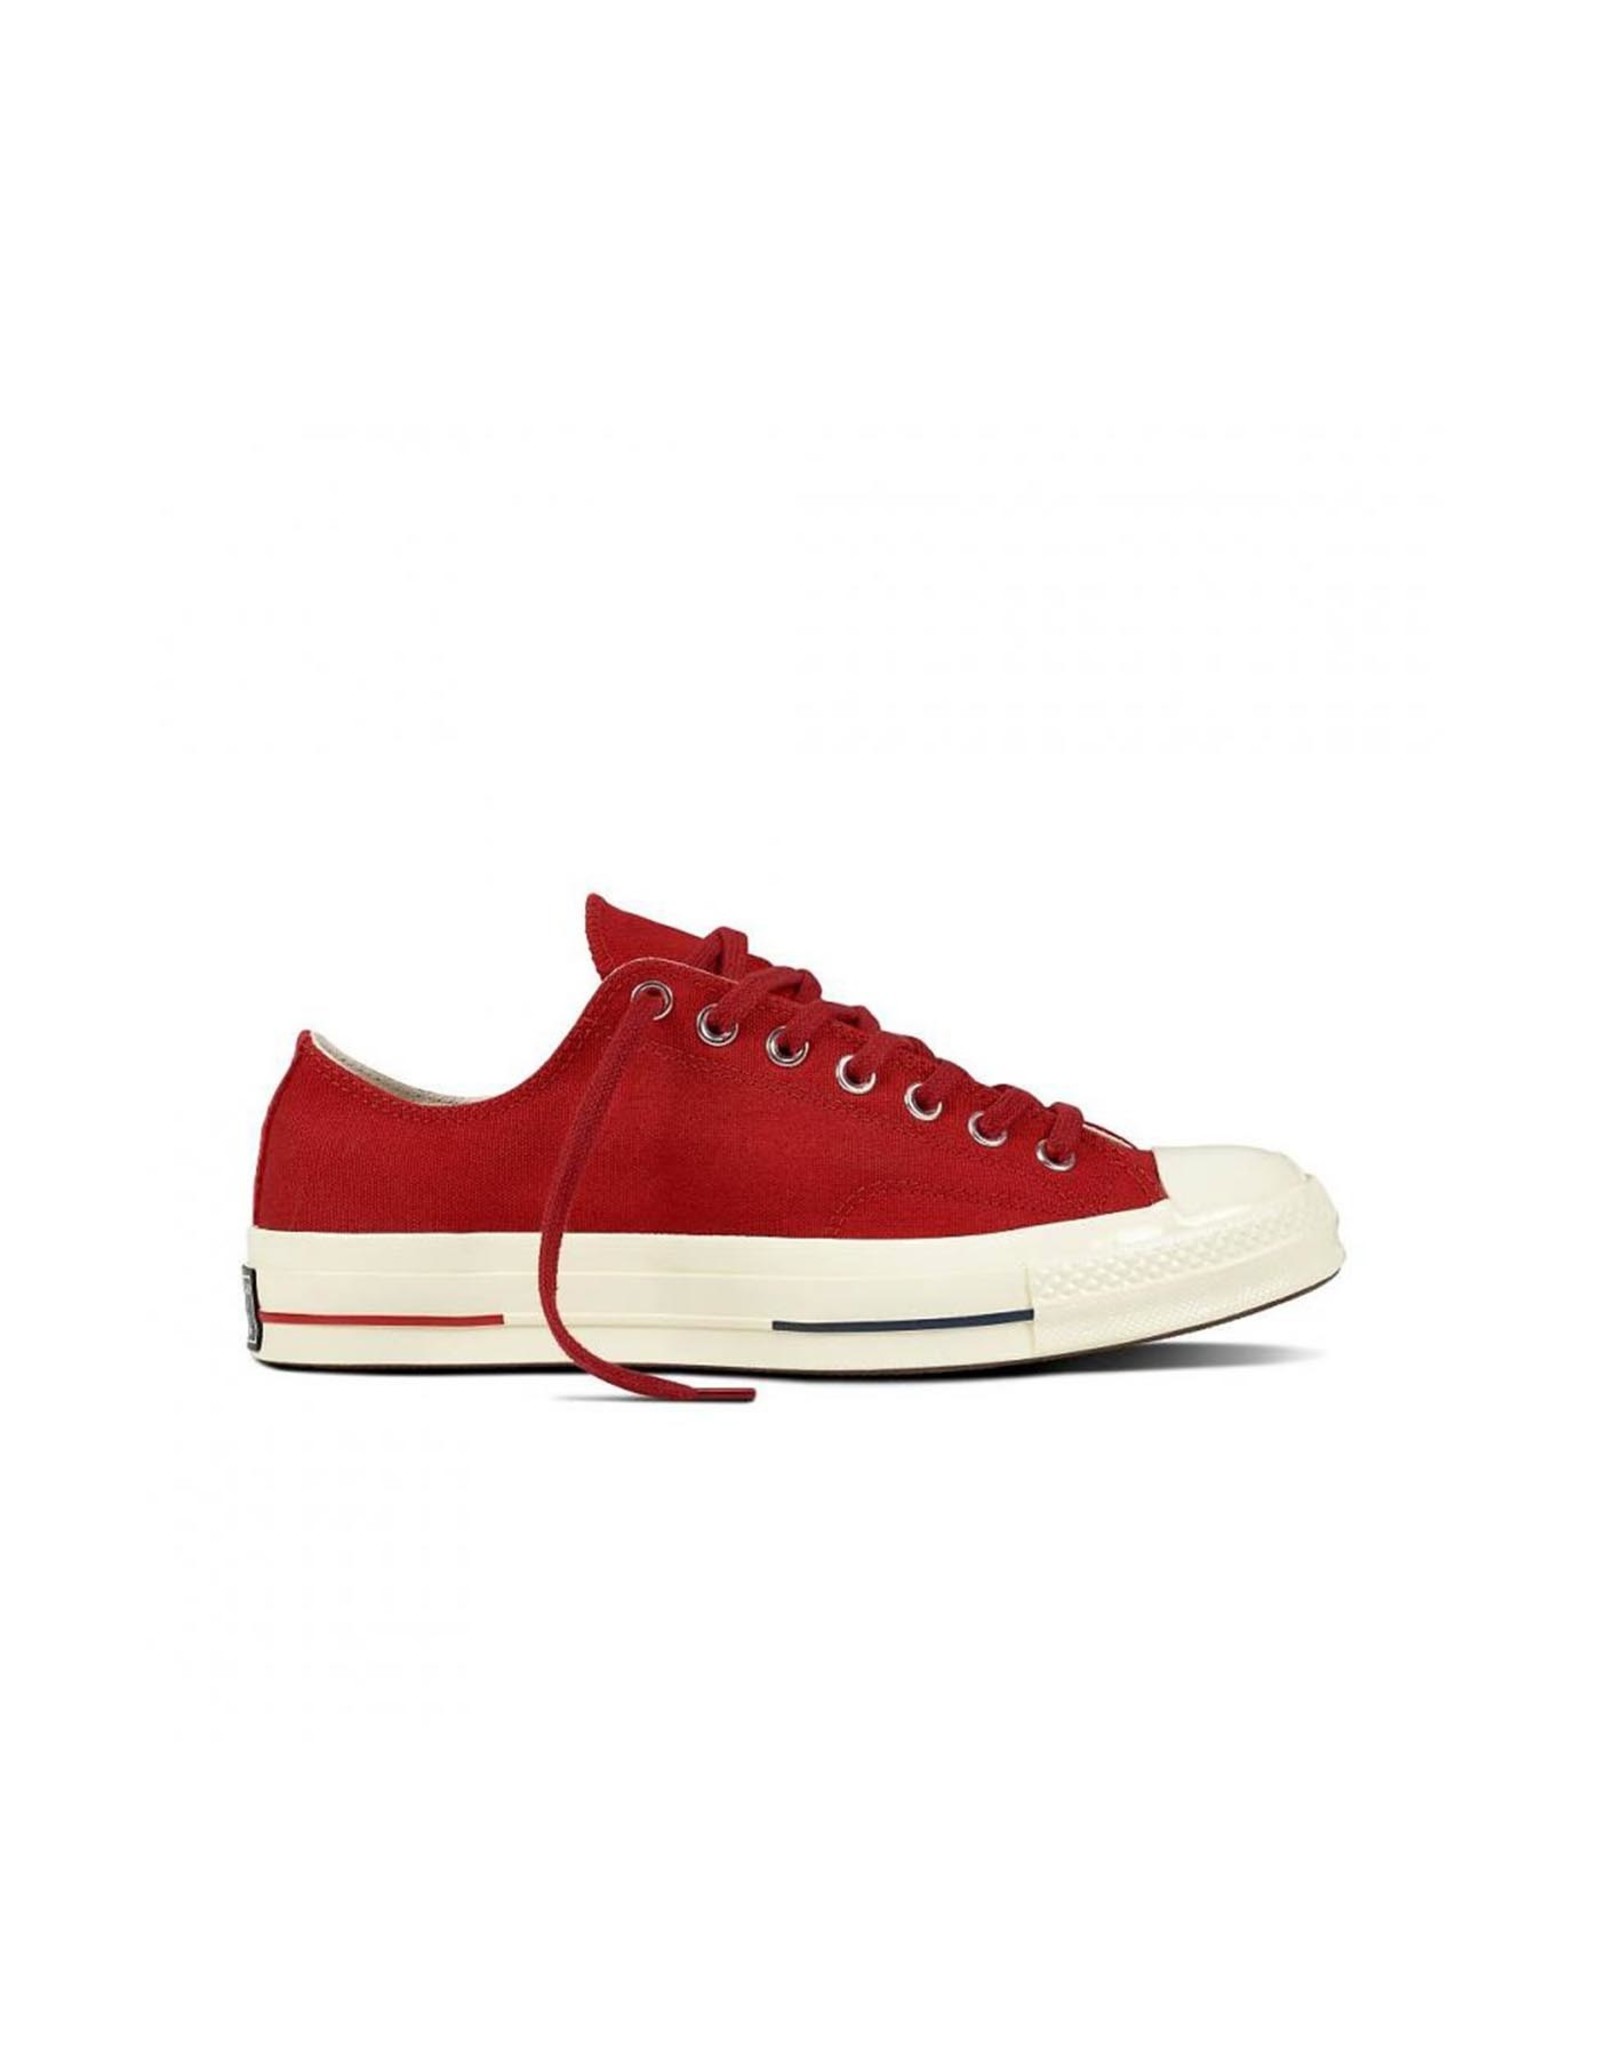 CHUCK TAYLOR 70 OX GYM RED/NAVY/GYM RED C870RE-160493C